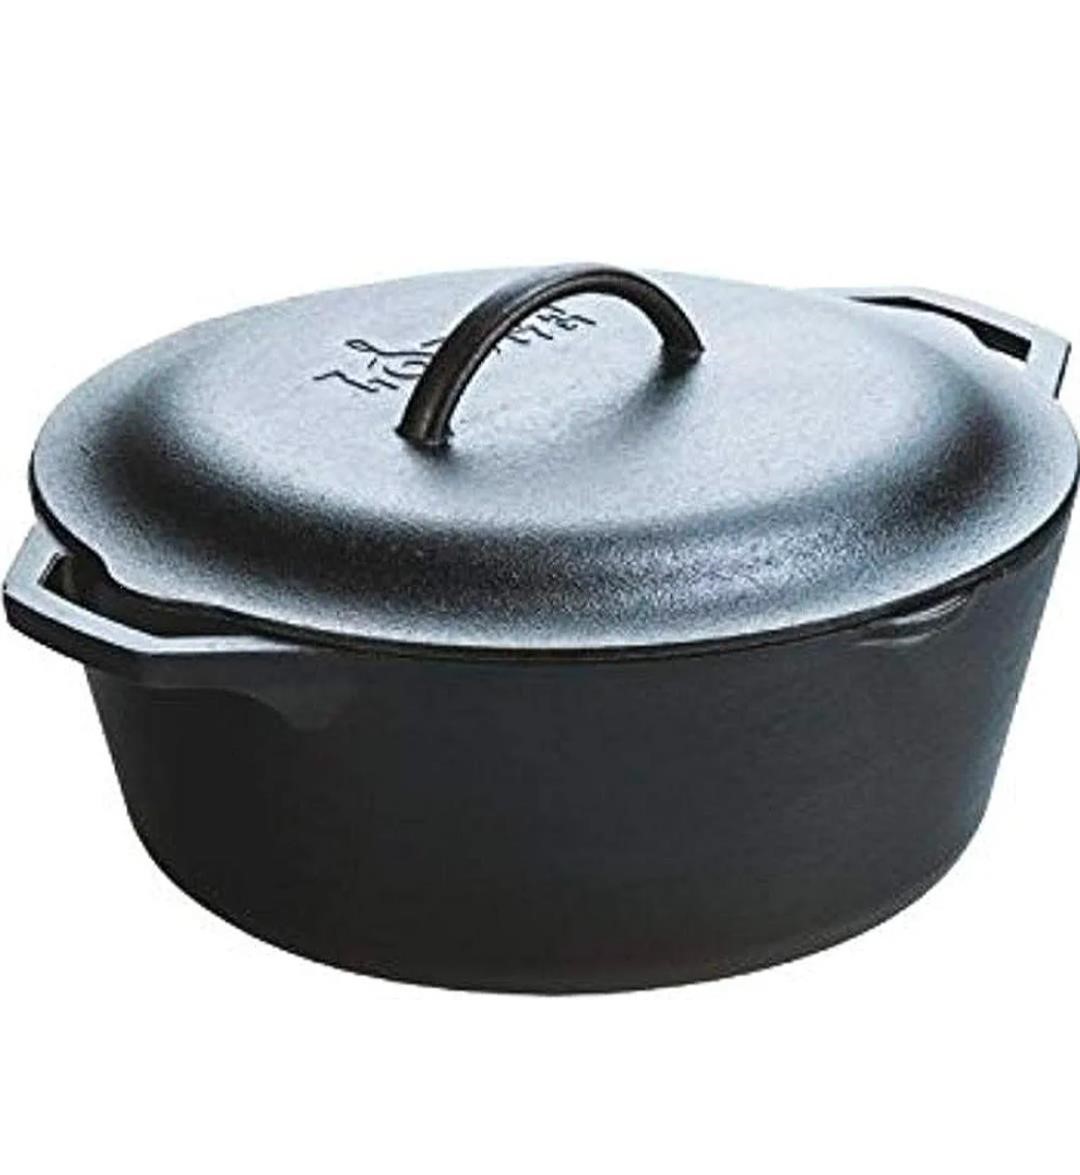 ($133) Lodge Dutch Oven with Dual Handles,